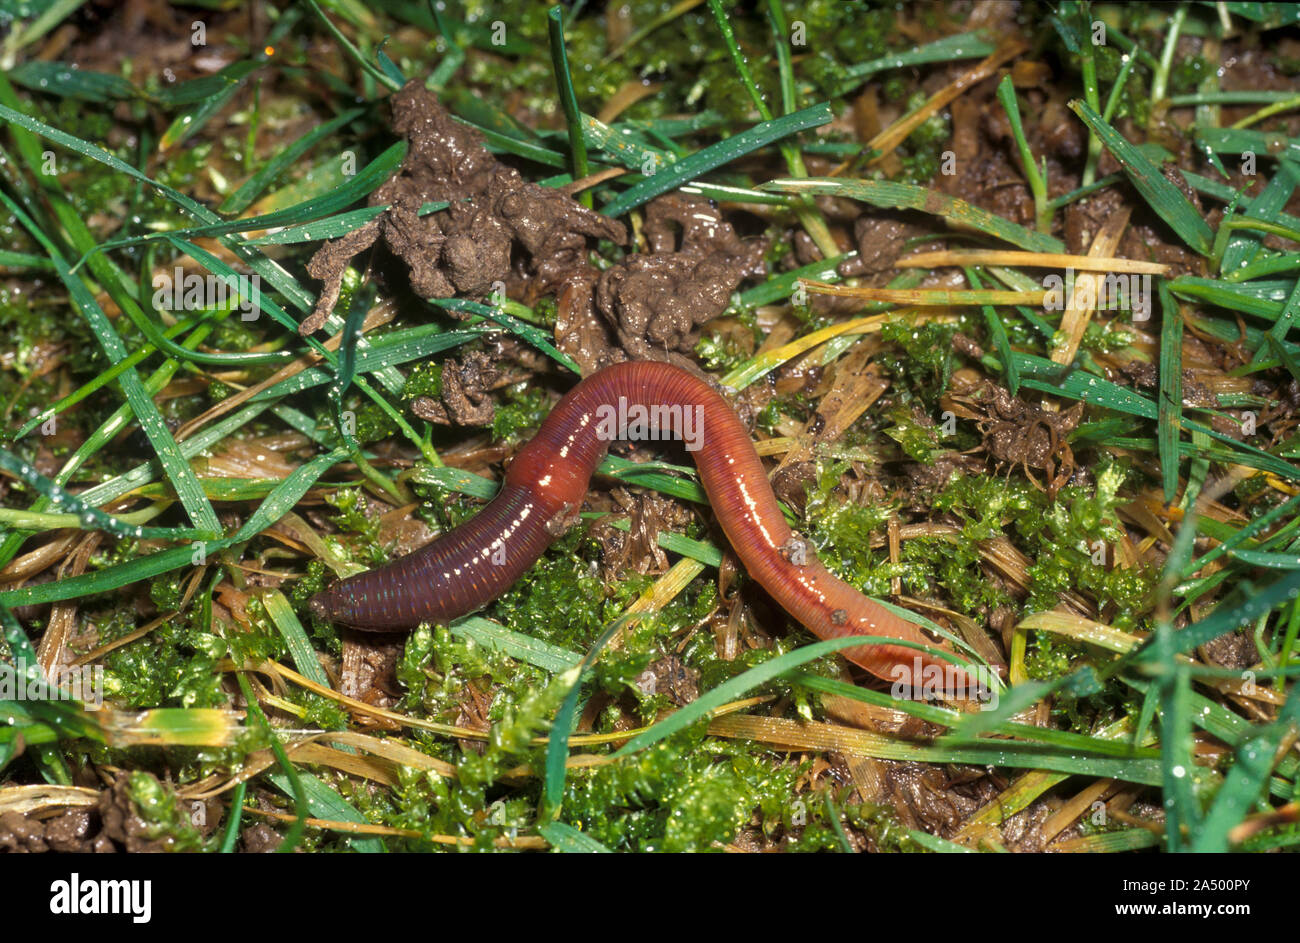 Earthworm on lawn, Lumbricus terrestris showing segments and saddle, on grass with worm casts, UK Stock Photo